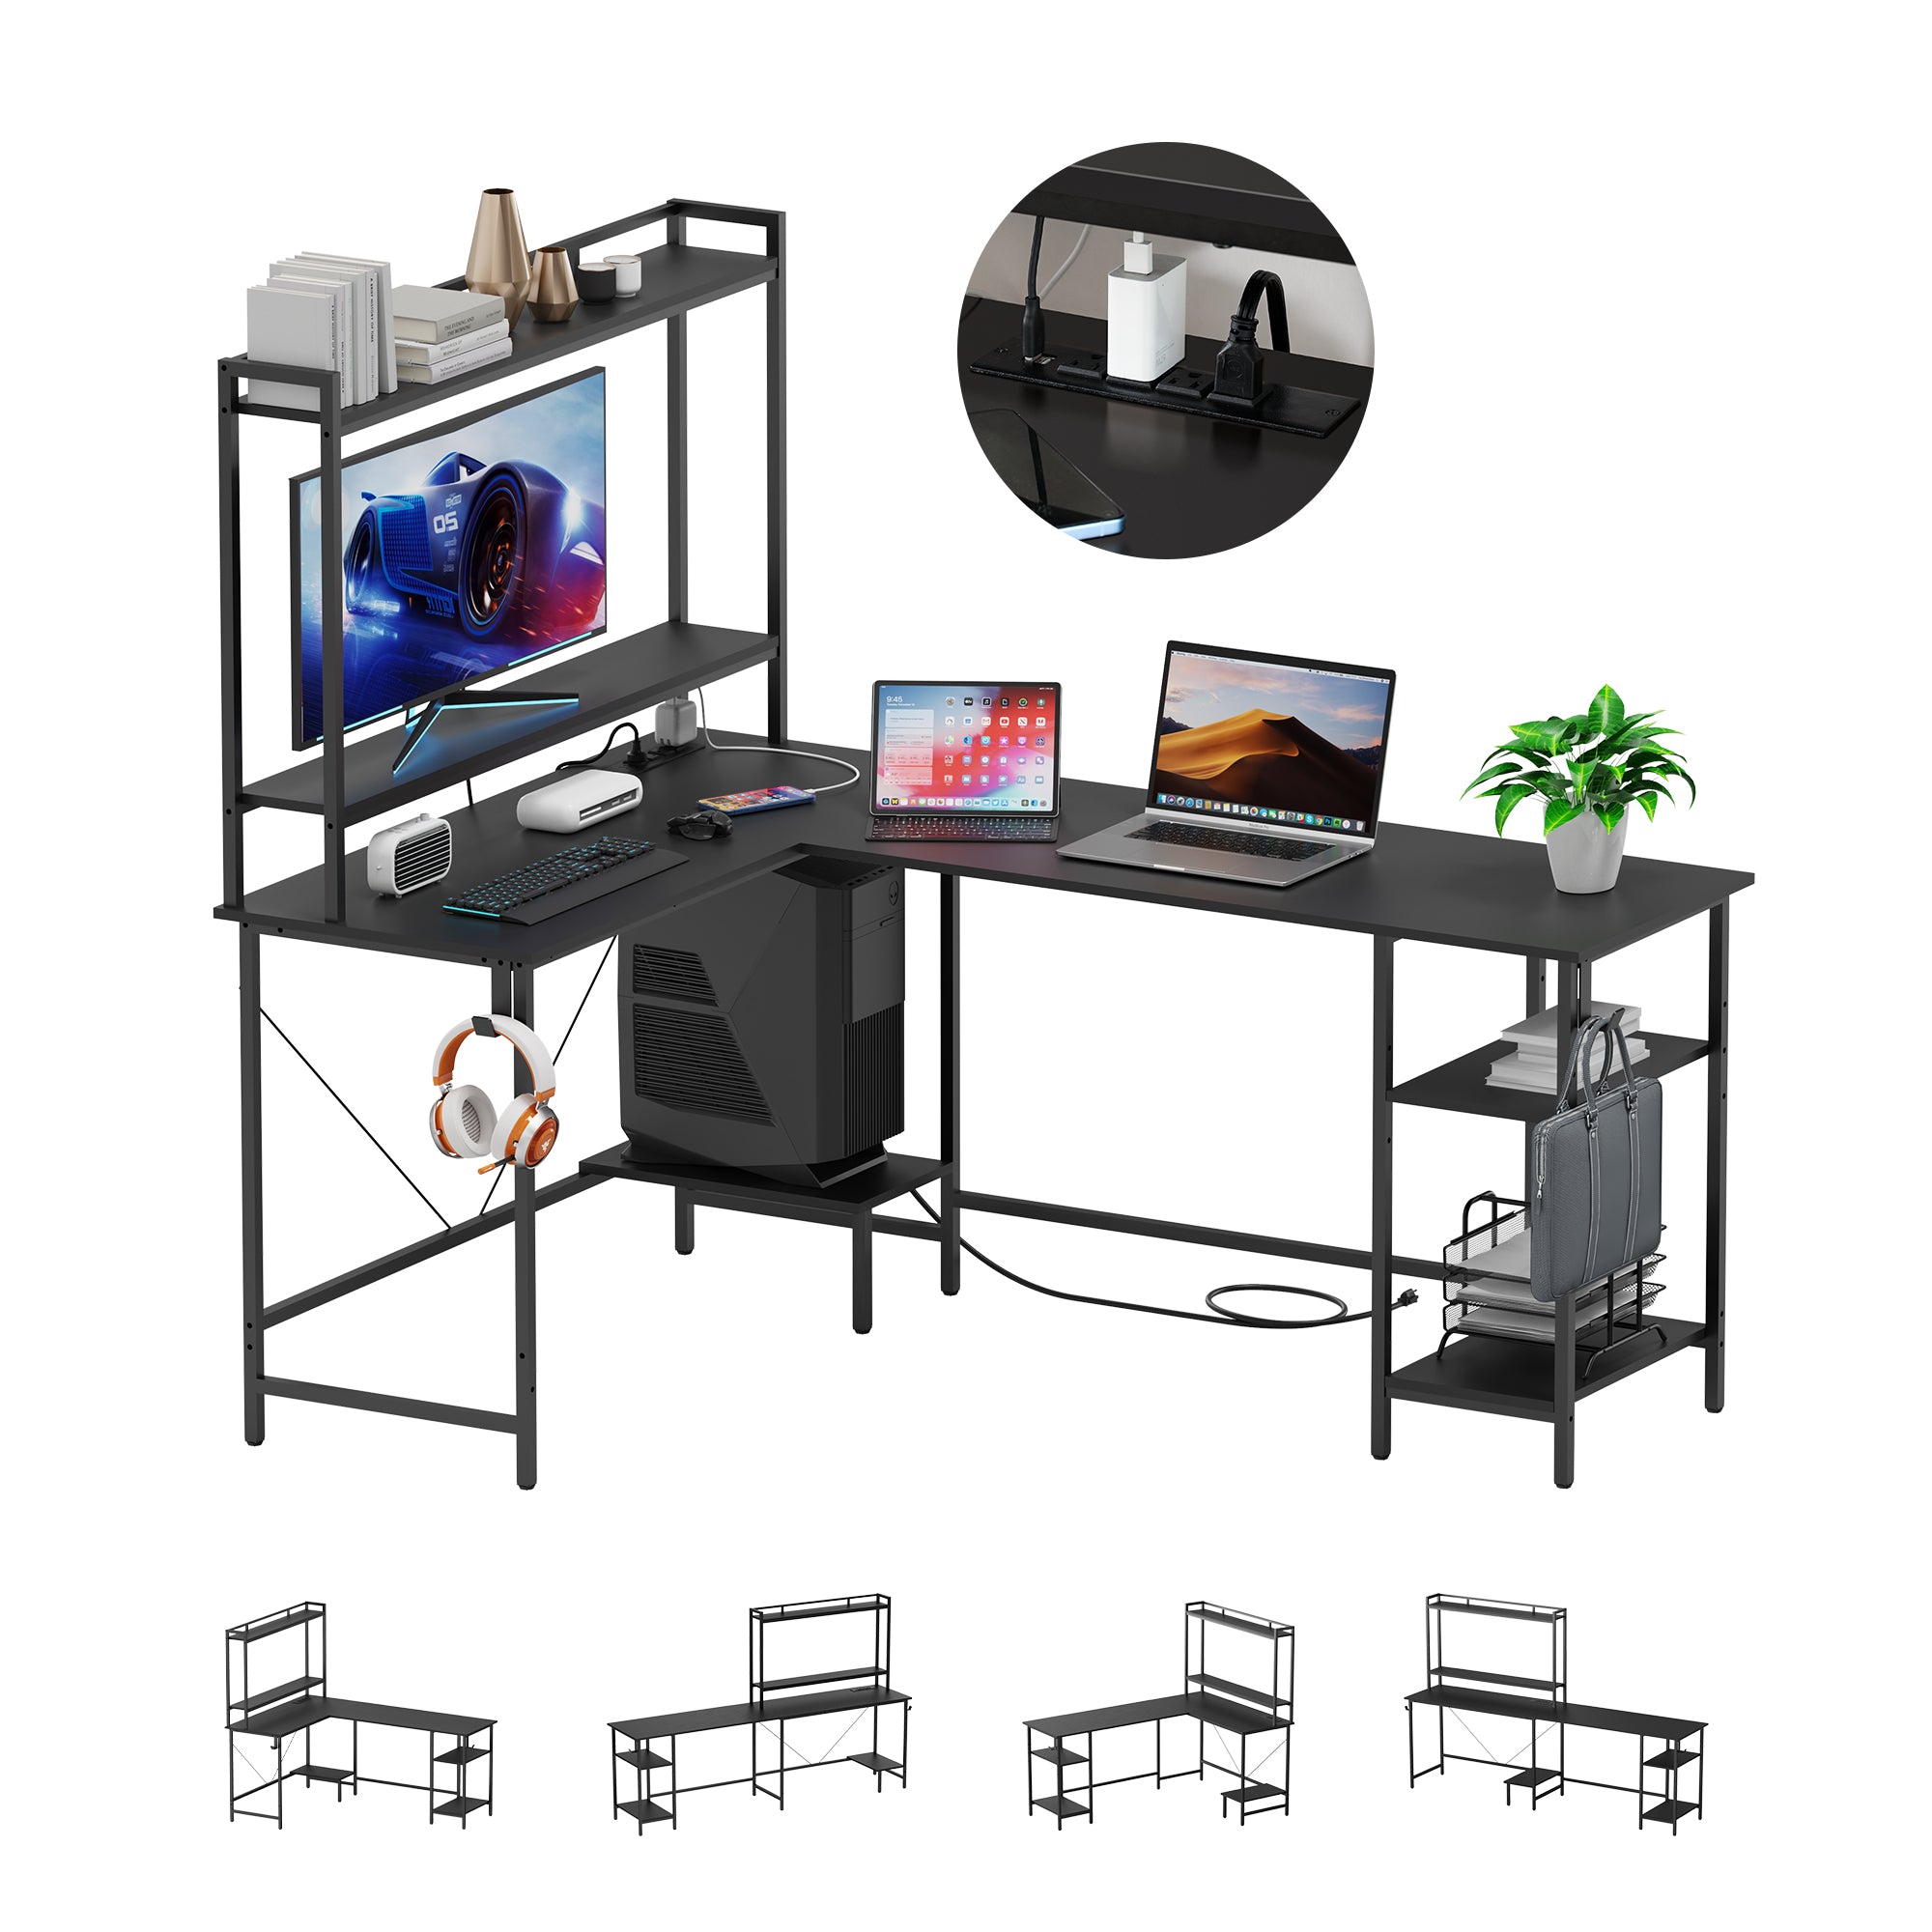 Evajoy HOF004 Home Office Desk, 94.5” Two Person L-Shaped Gaming Desk with AC Outlets and USB Ports